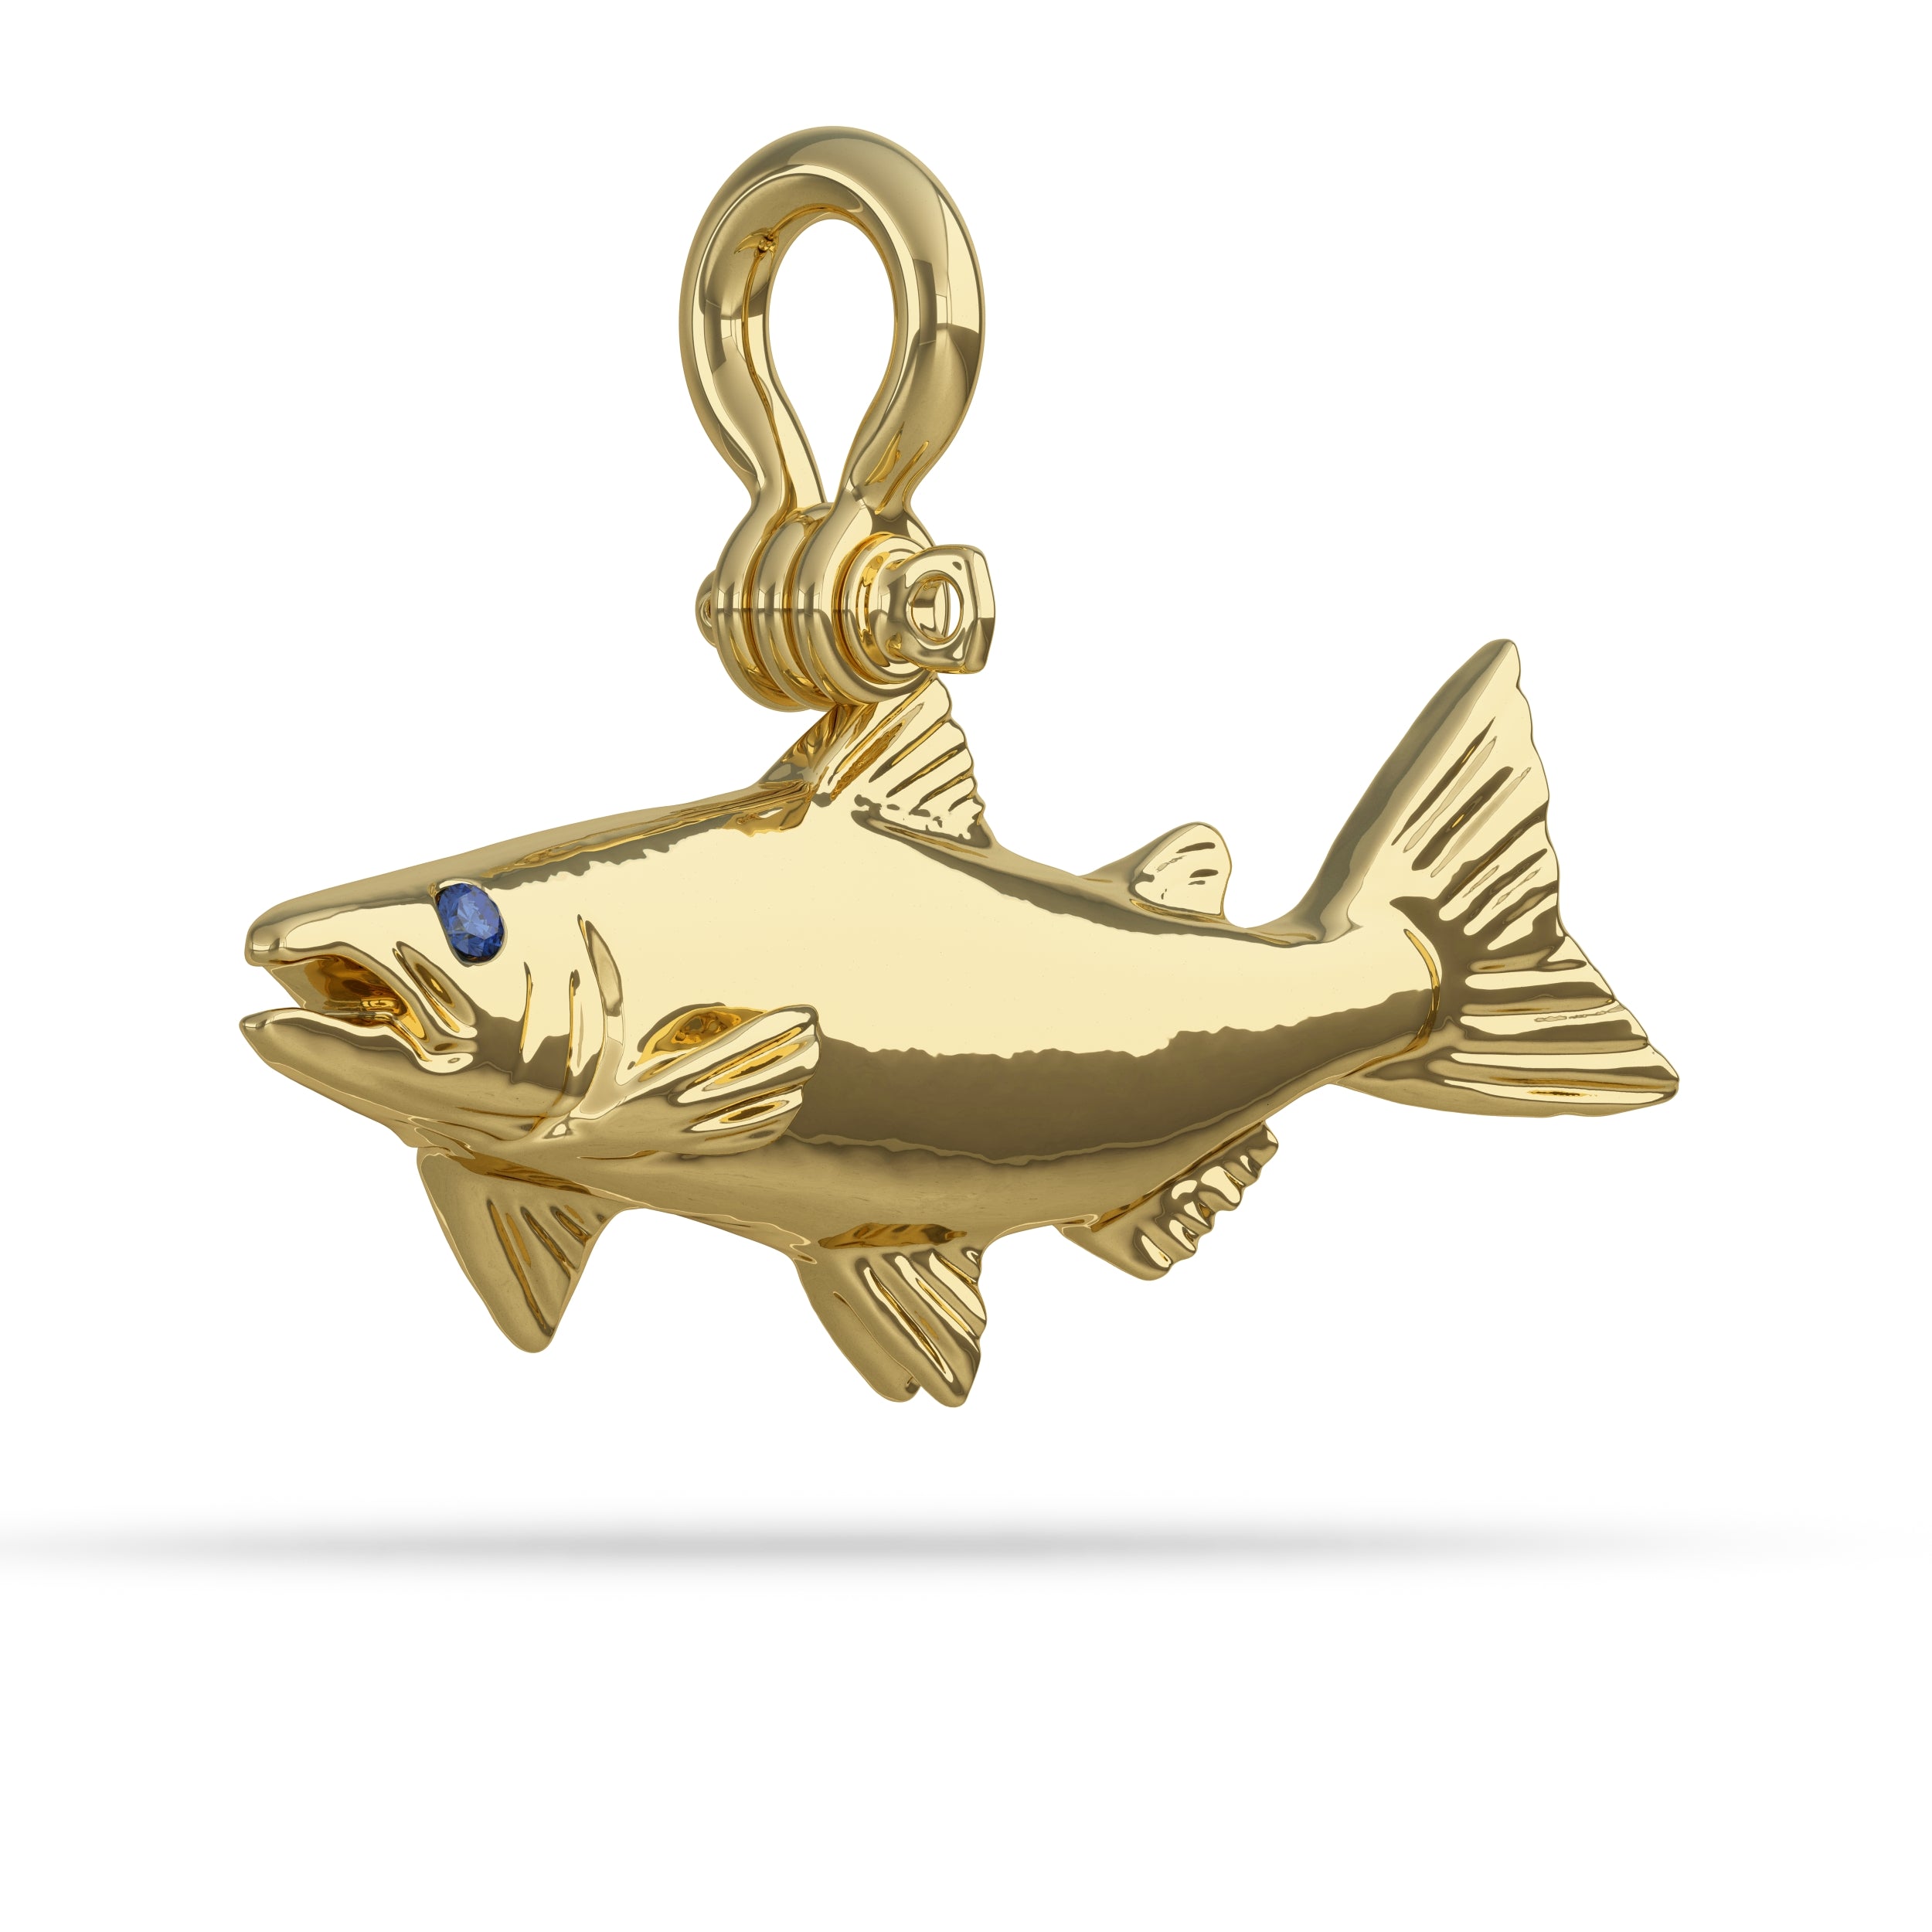 Solid 14k Gold Coho Salmon Pendant High Polished Mirror Finish With Blue Sapphire Eye with A Mariner Shackle Bail Custom Designed By Nautical Treasure Jewelry In The Florida Keys Islamorada fly fishing 